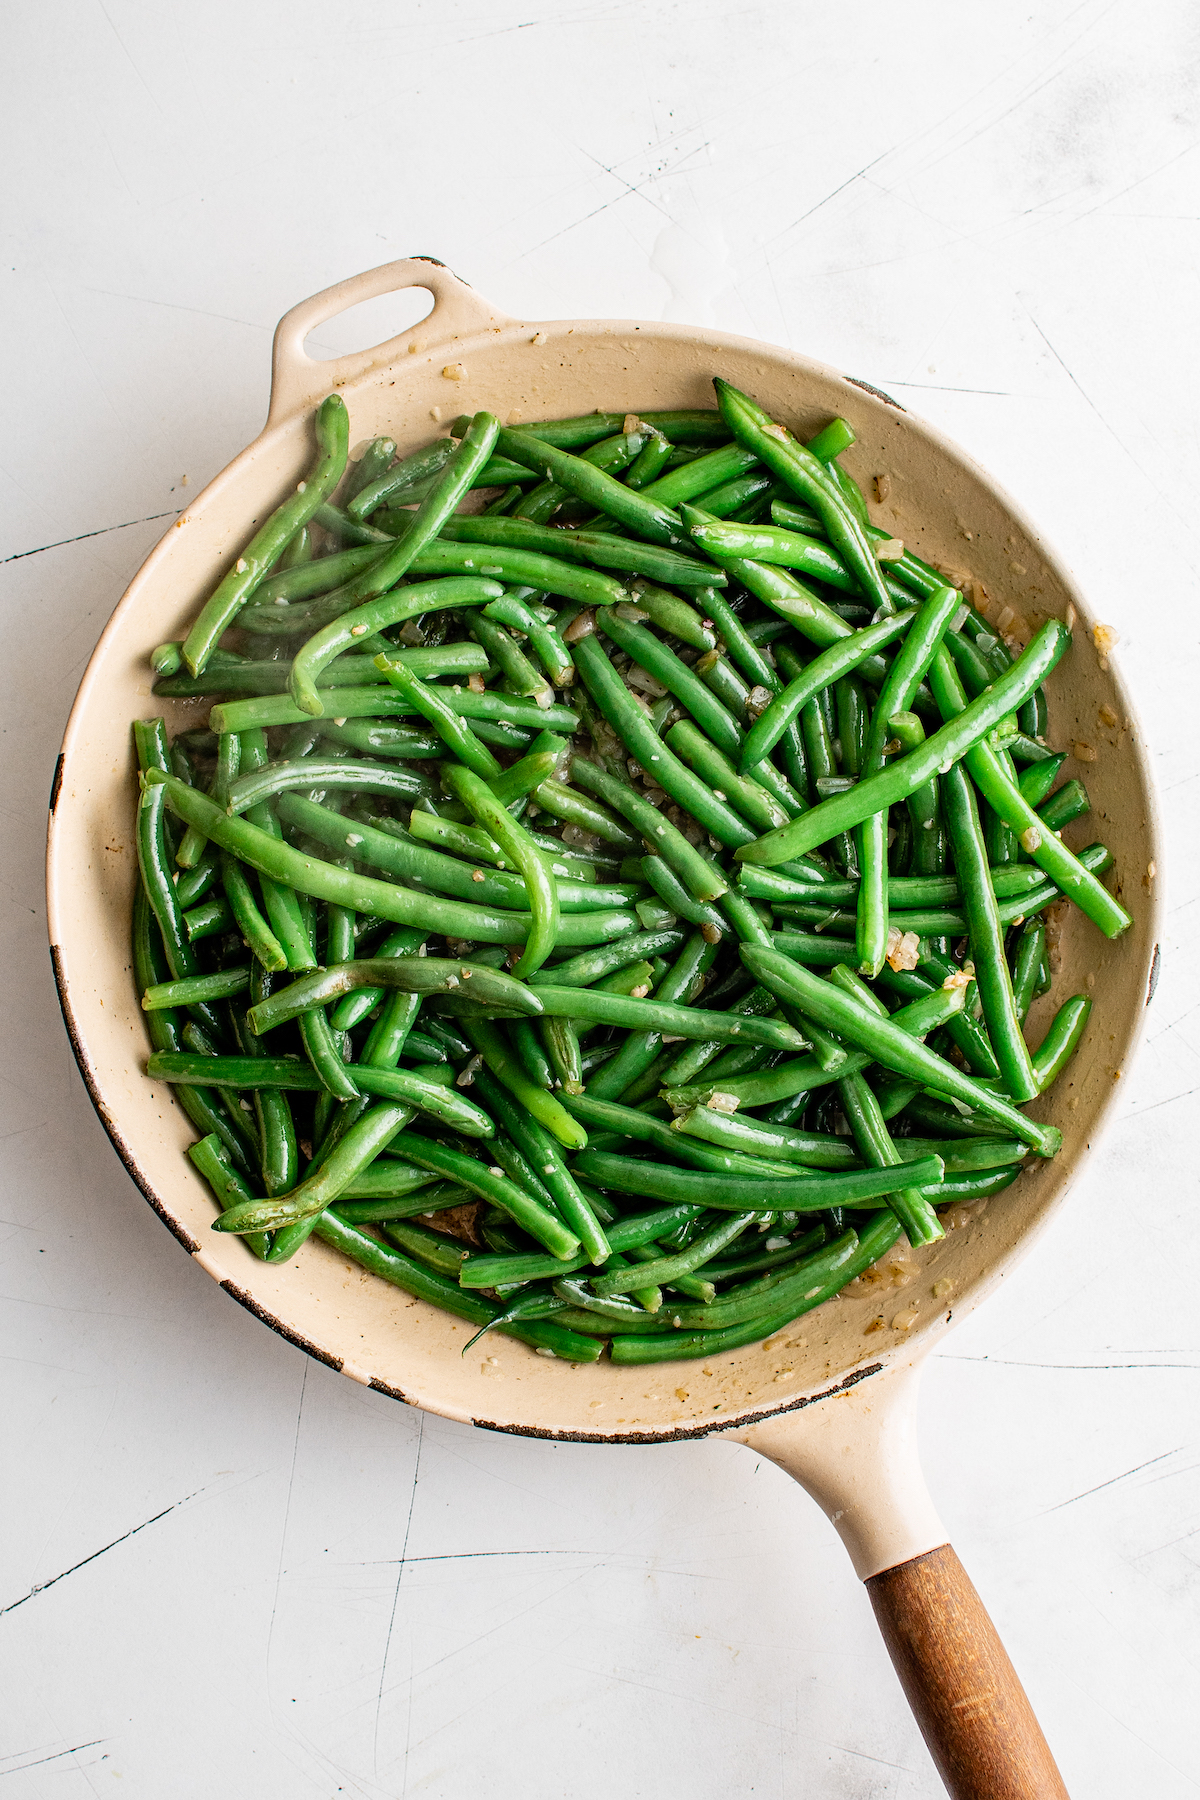 Sauteed green beans with garlic.